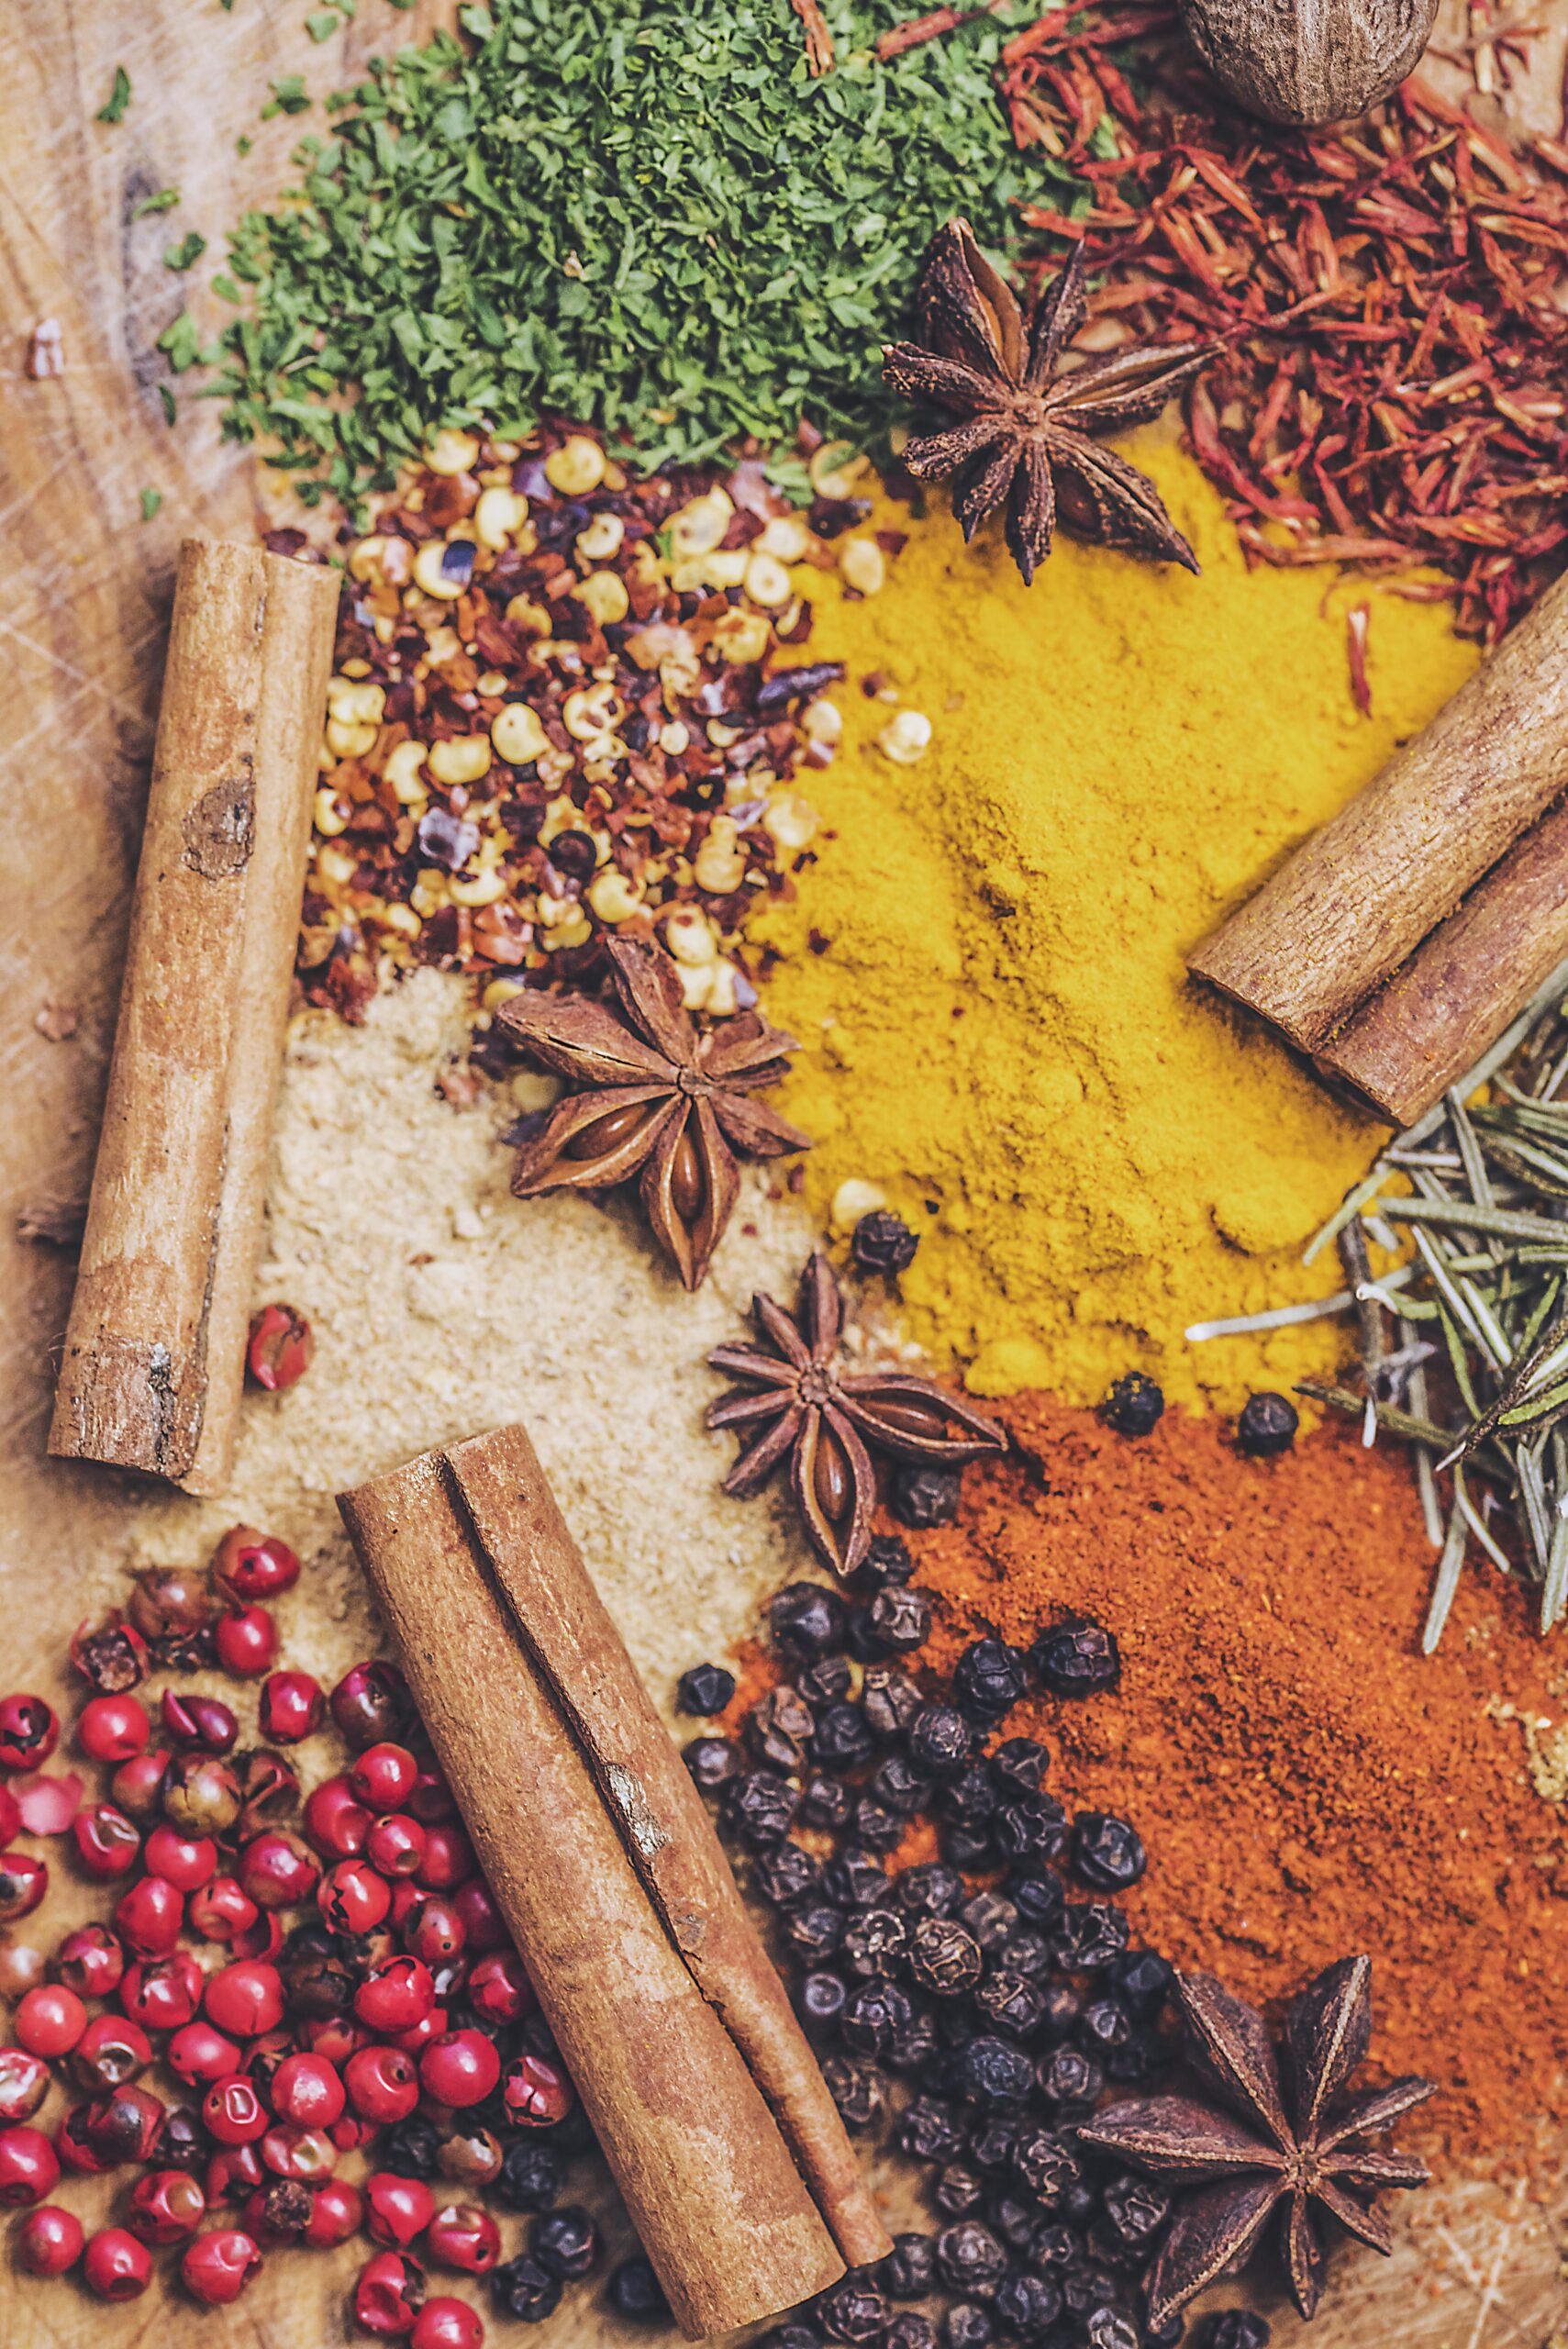 Top 10 Winter Spices That Boost Immunity, Aid Digestion And More